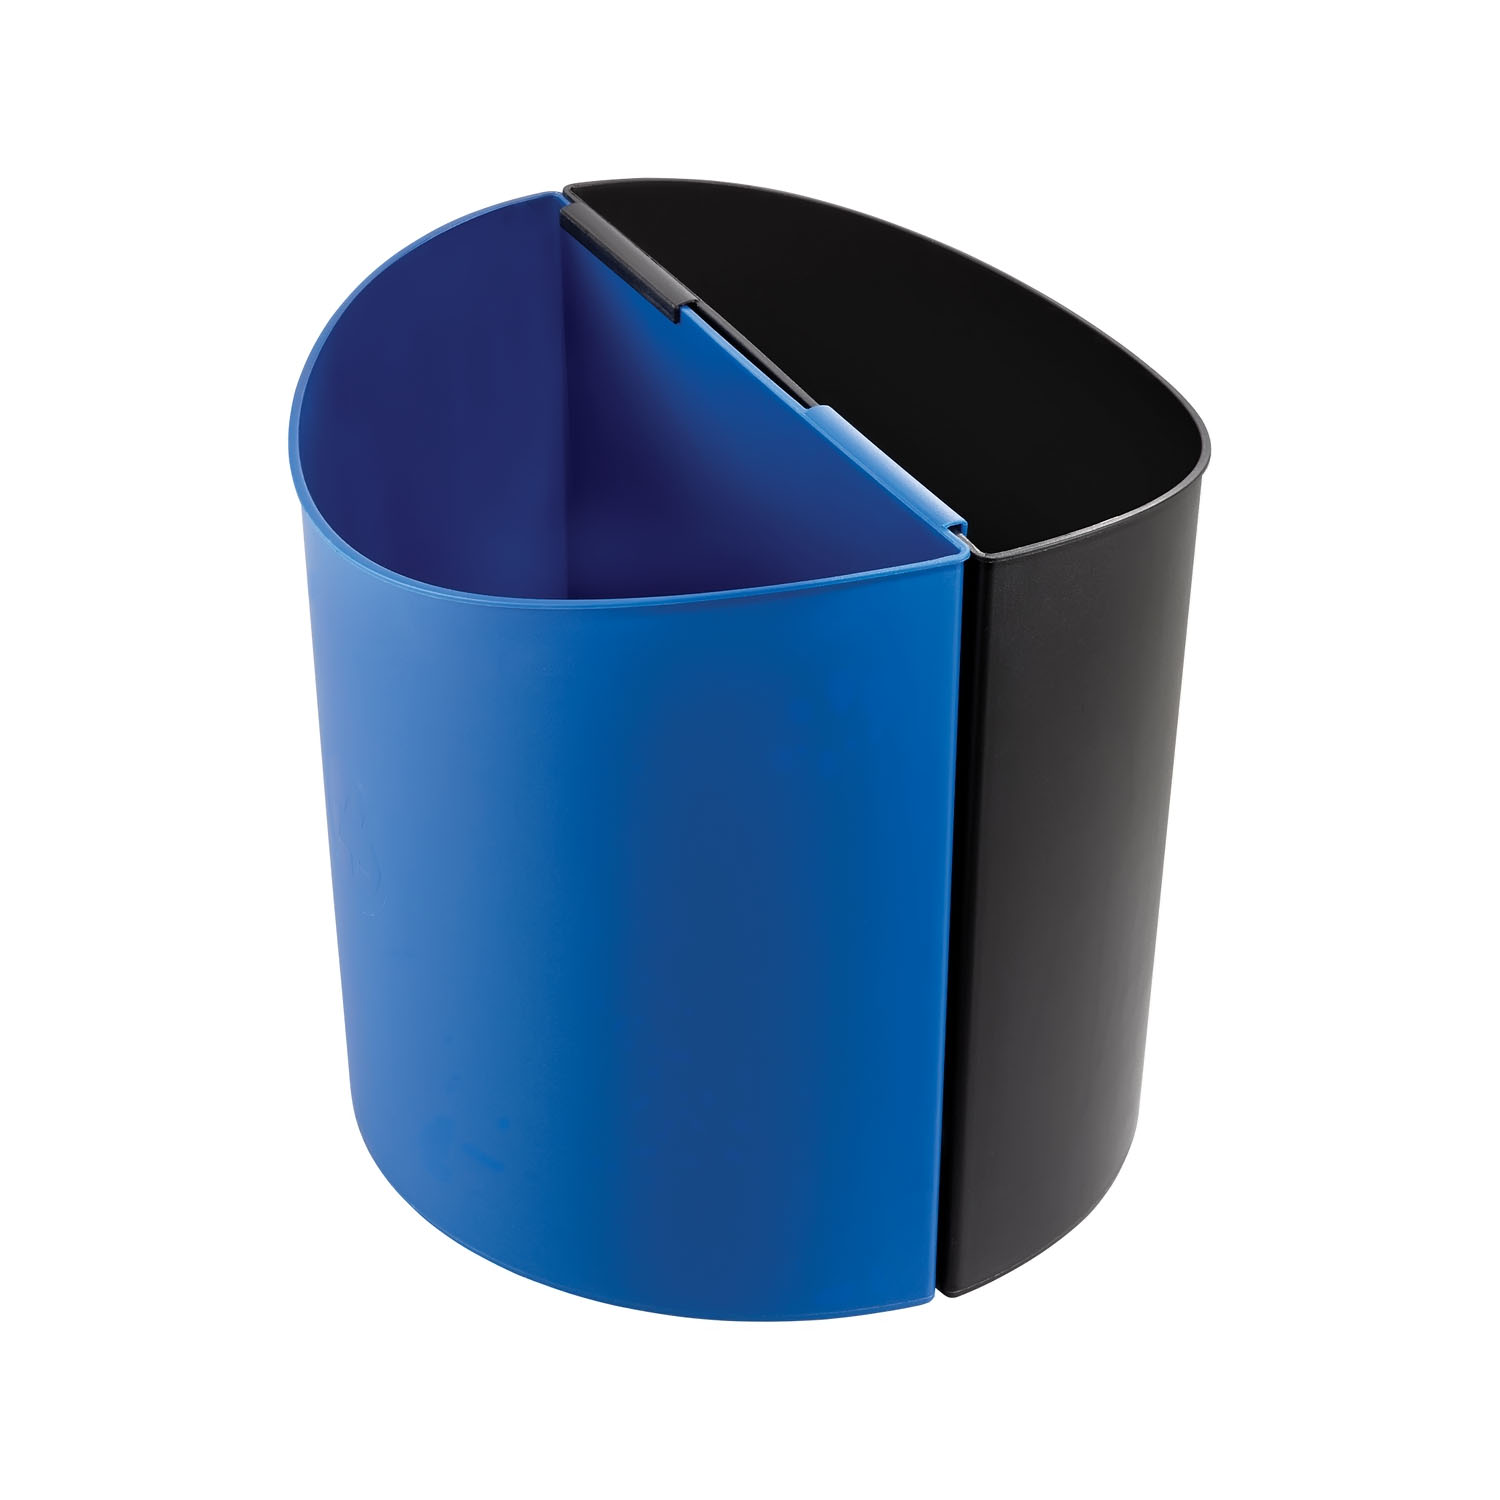 Safco Desk-Side Recycling Receptacle - 14 gal Capacity - Half-round - 16.5" Height x 17.5" Width x 9.5" Depth - Plastic - Black